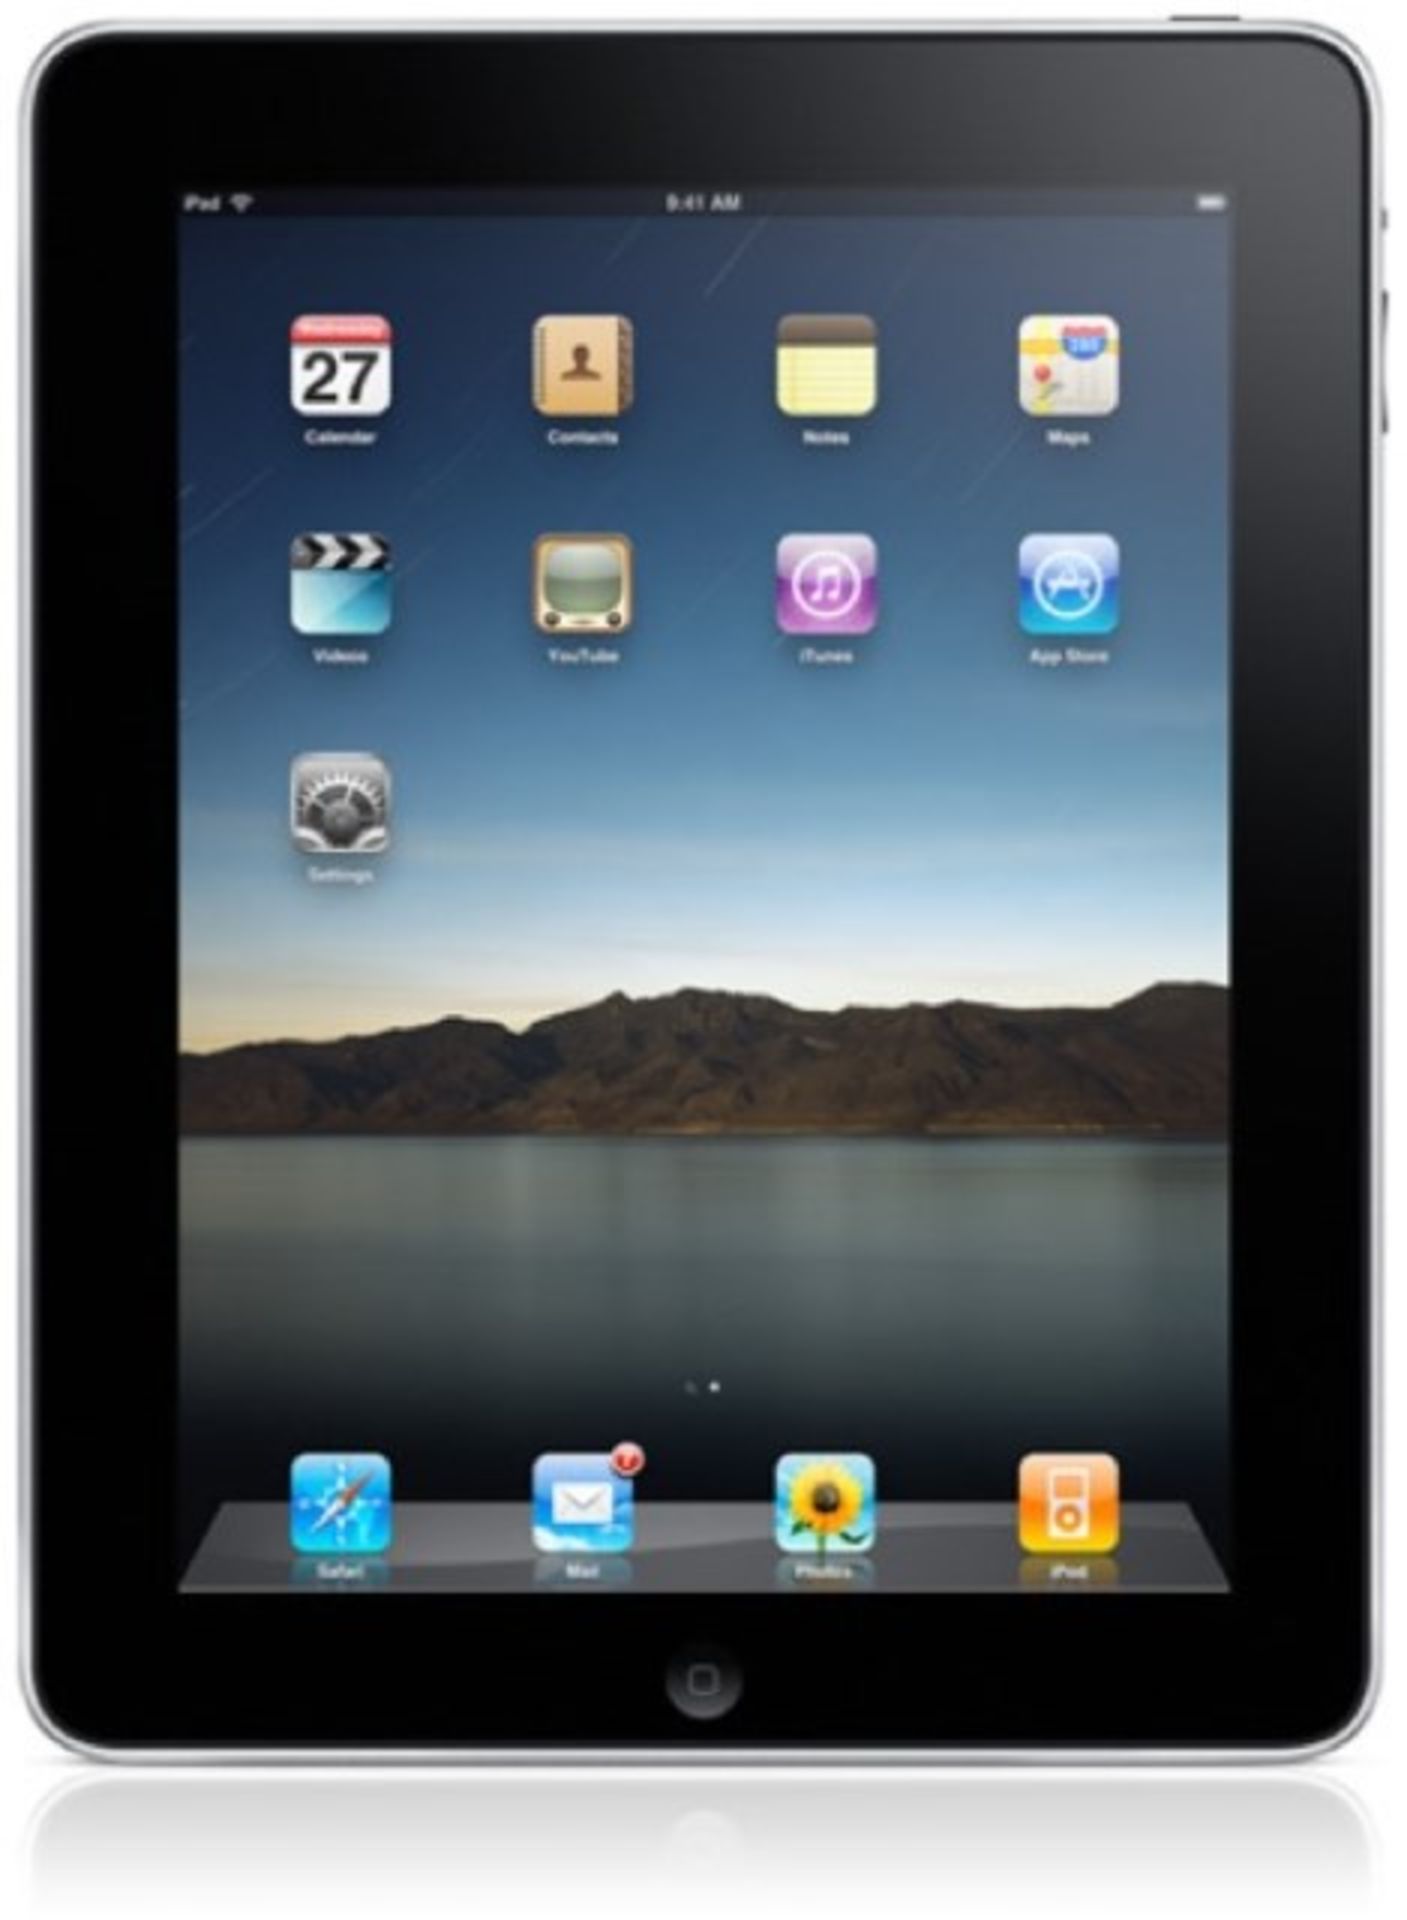 V Apple iPad 64Gb 3G & Wi-Fi In Generic Box - B Grade (May Have Some Blemishes)